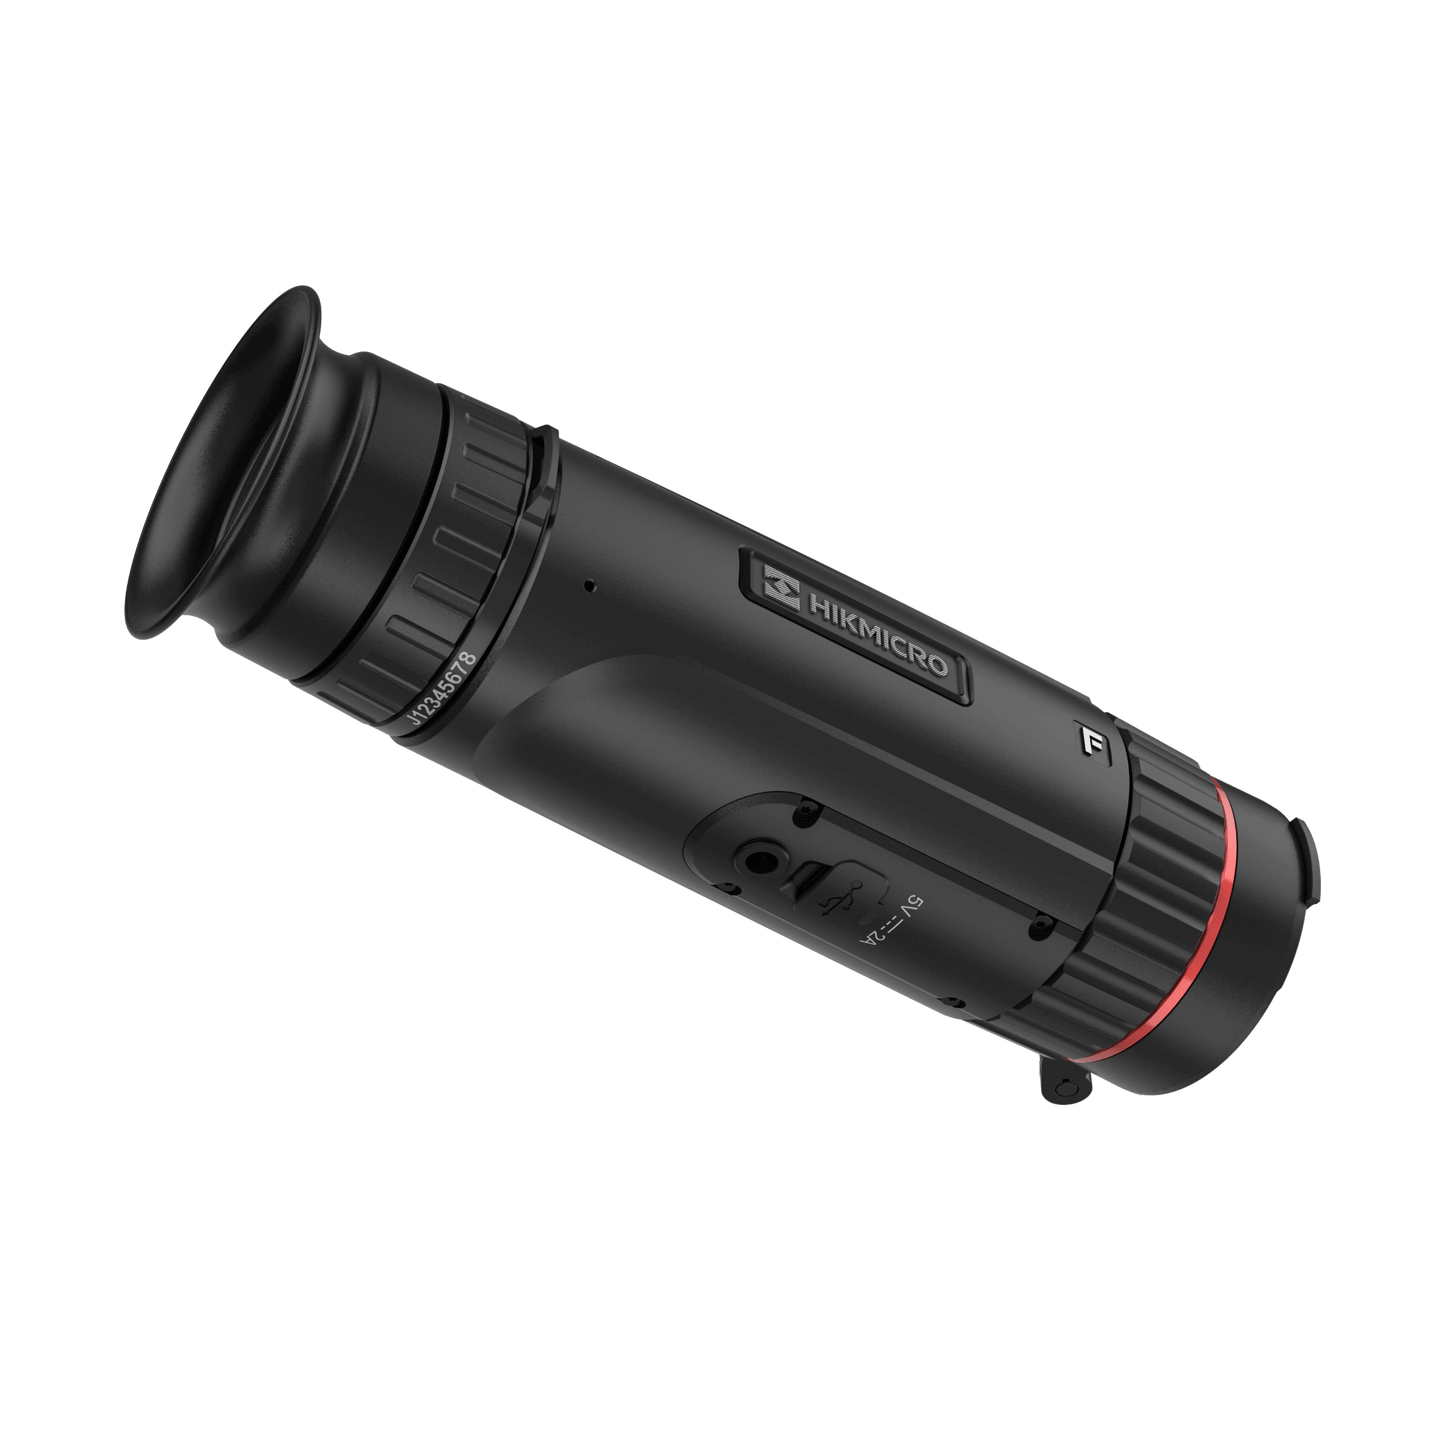 HikMicro Thermal Imaging Monocular for Sale - HikMicro Falcon Series FQ35 - HM-TS46-35XG_W-FQ35 - Front Right view from below